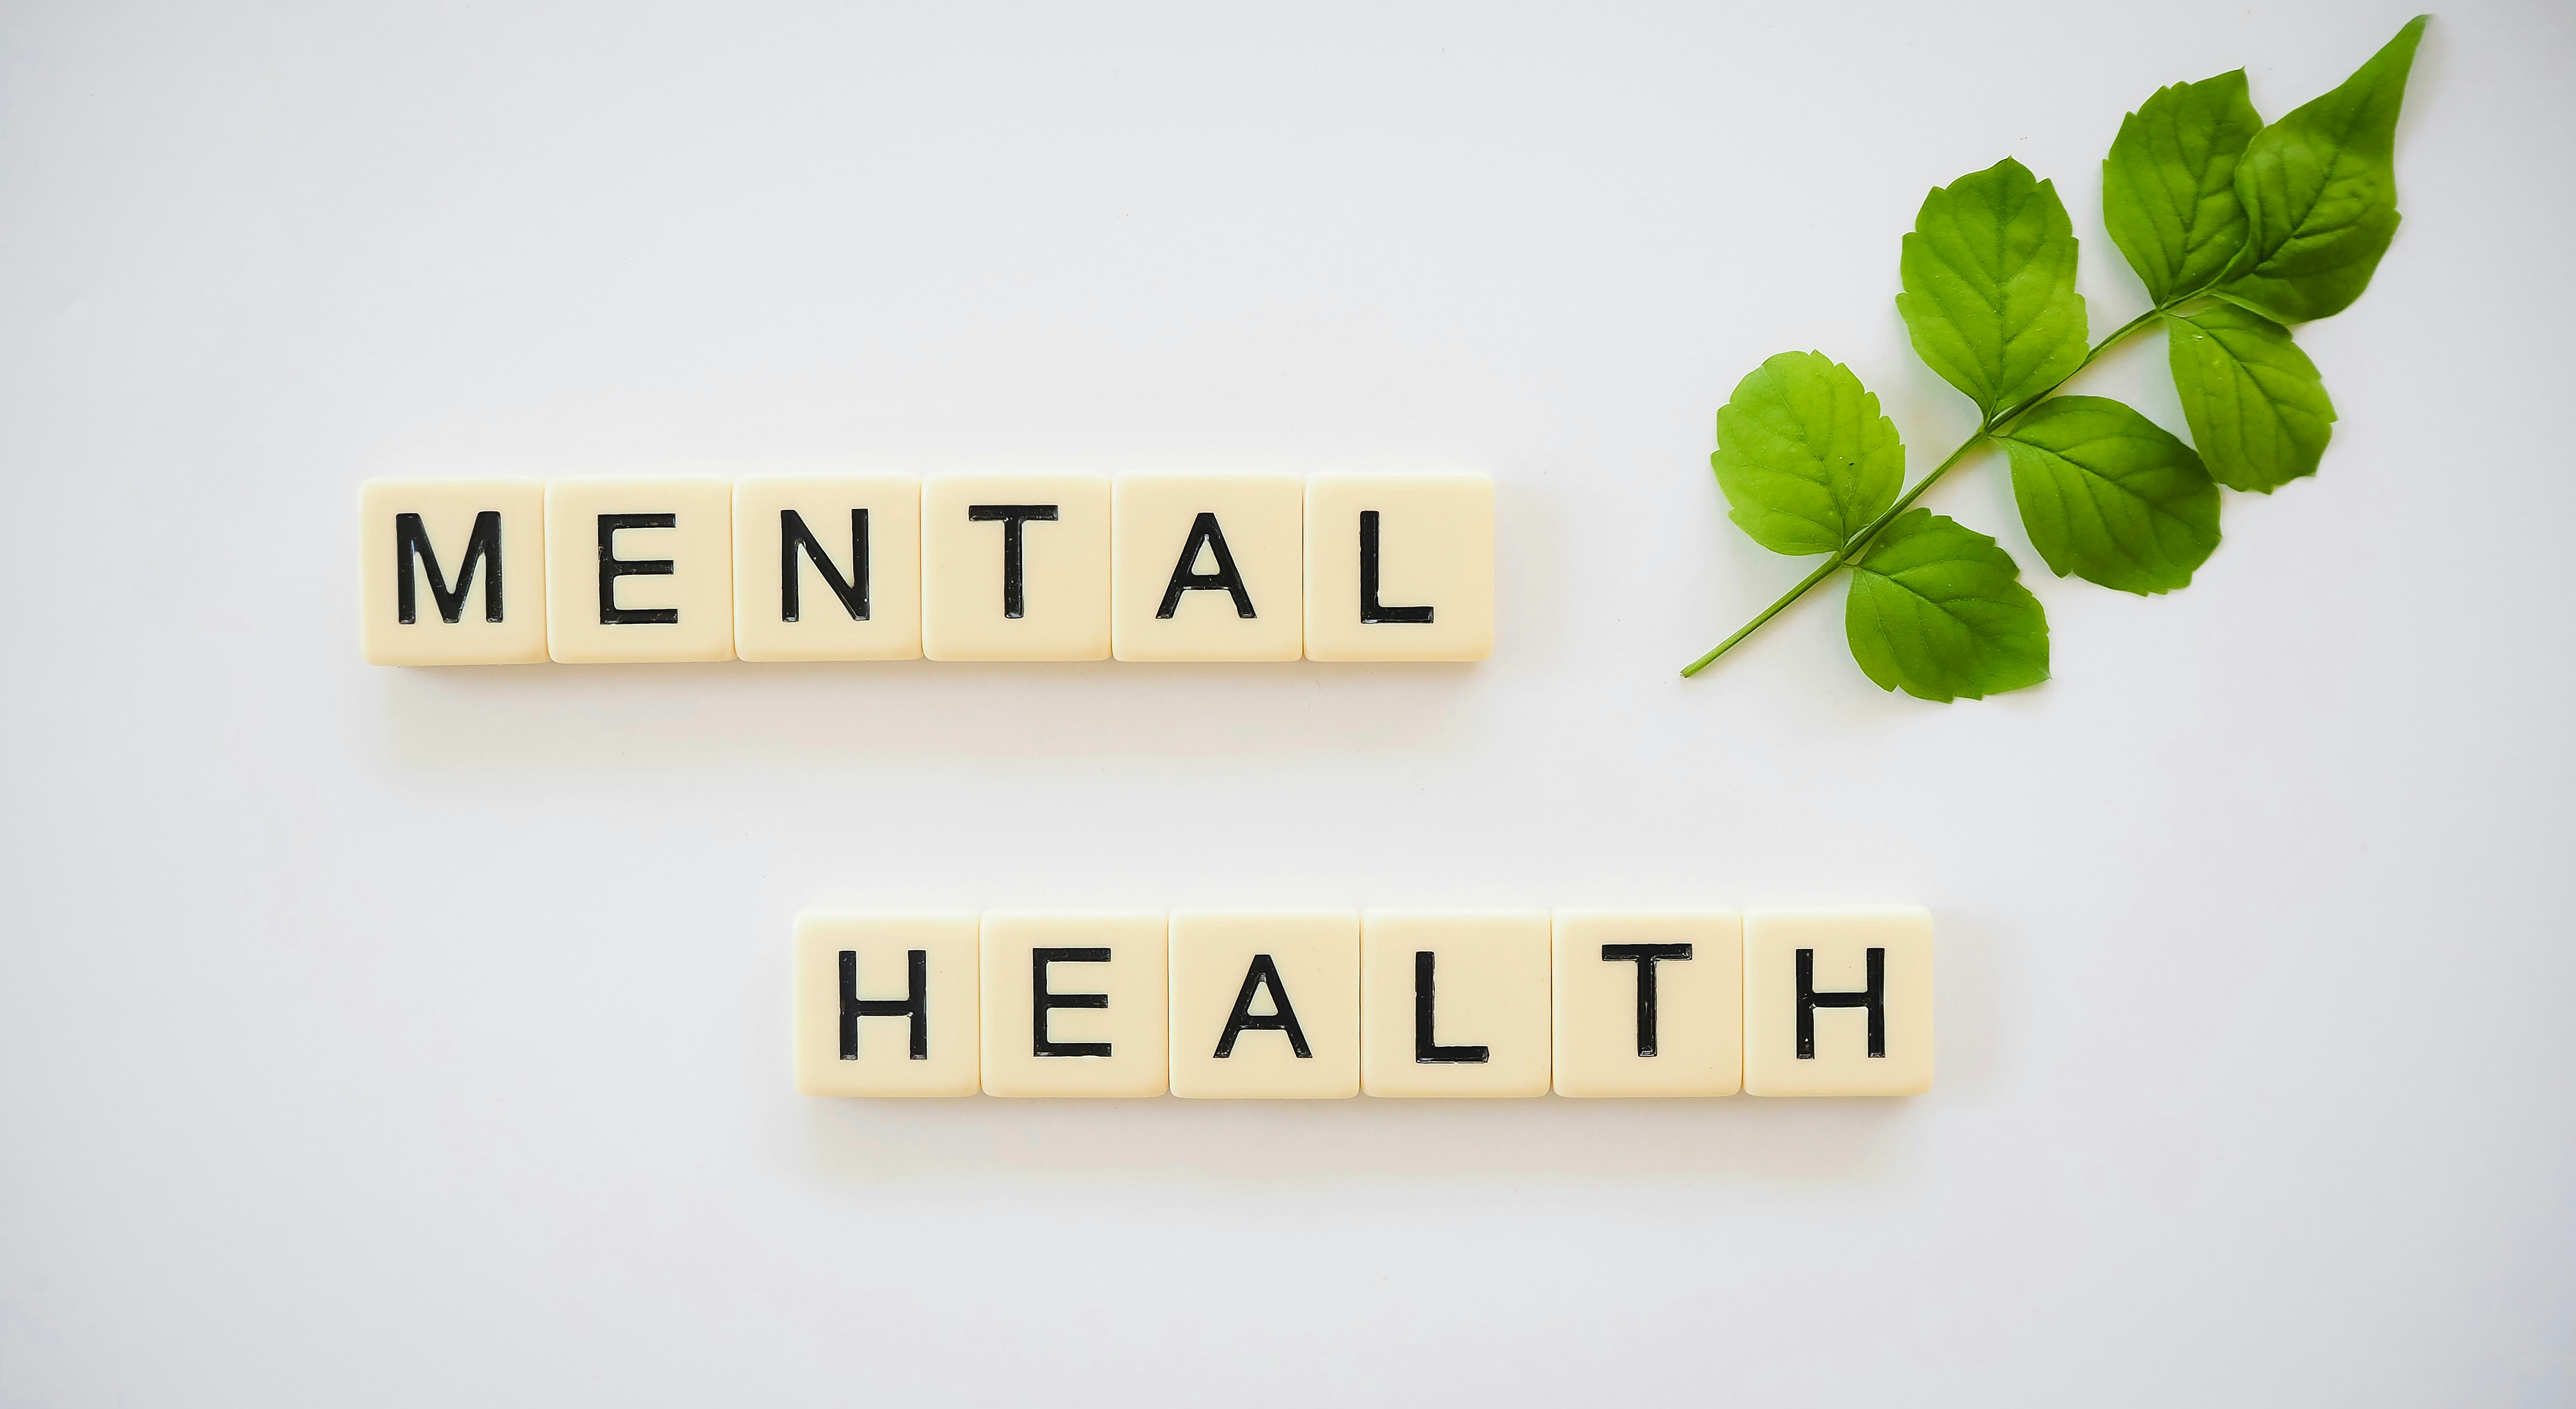 May: Mental Health Month